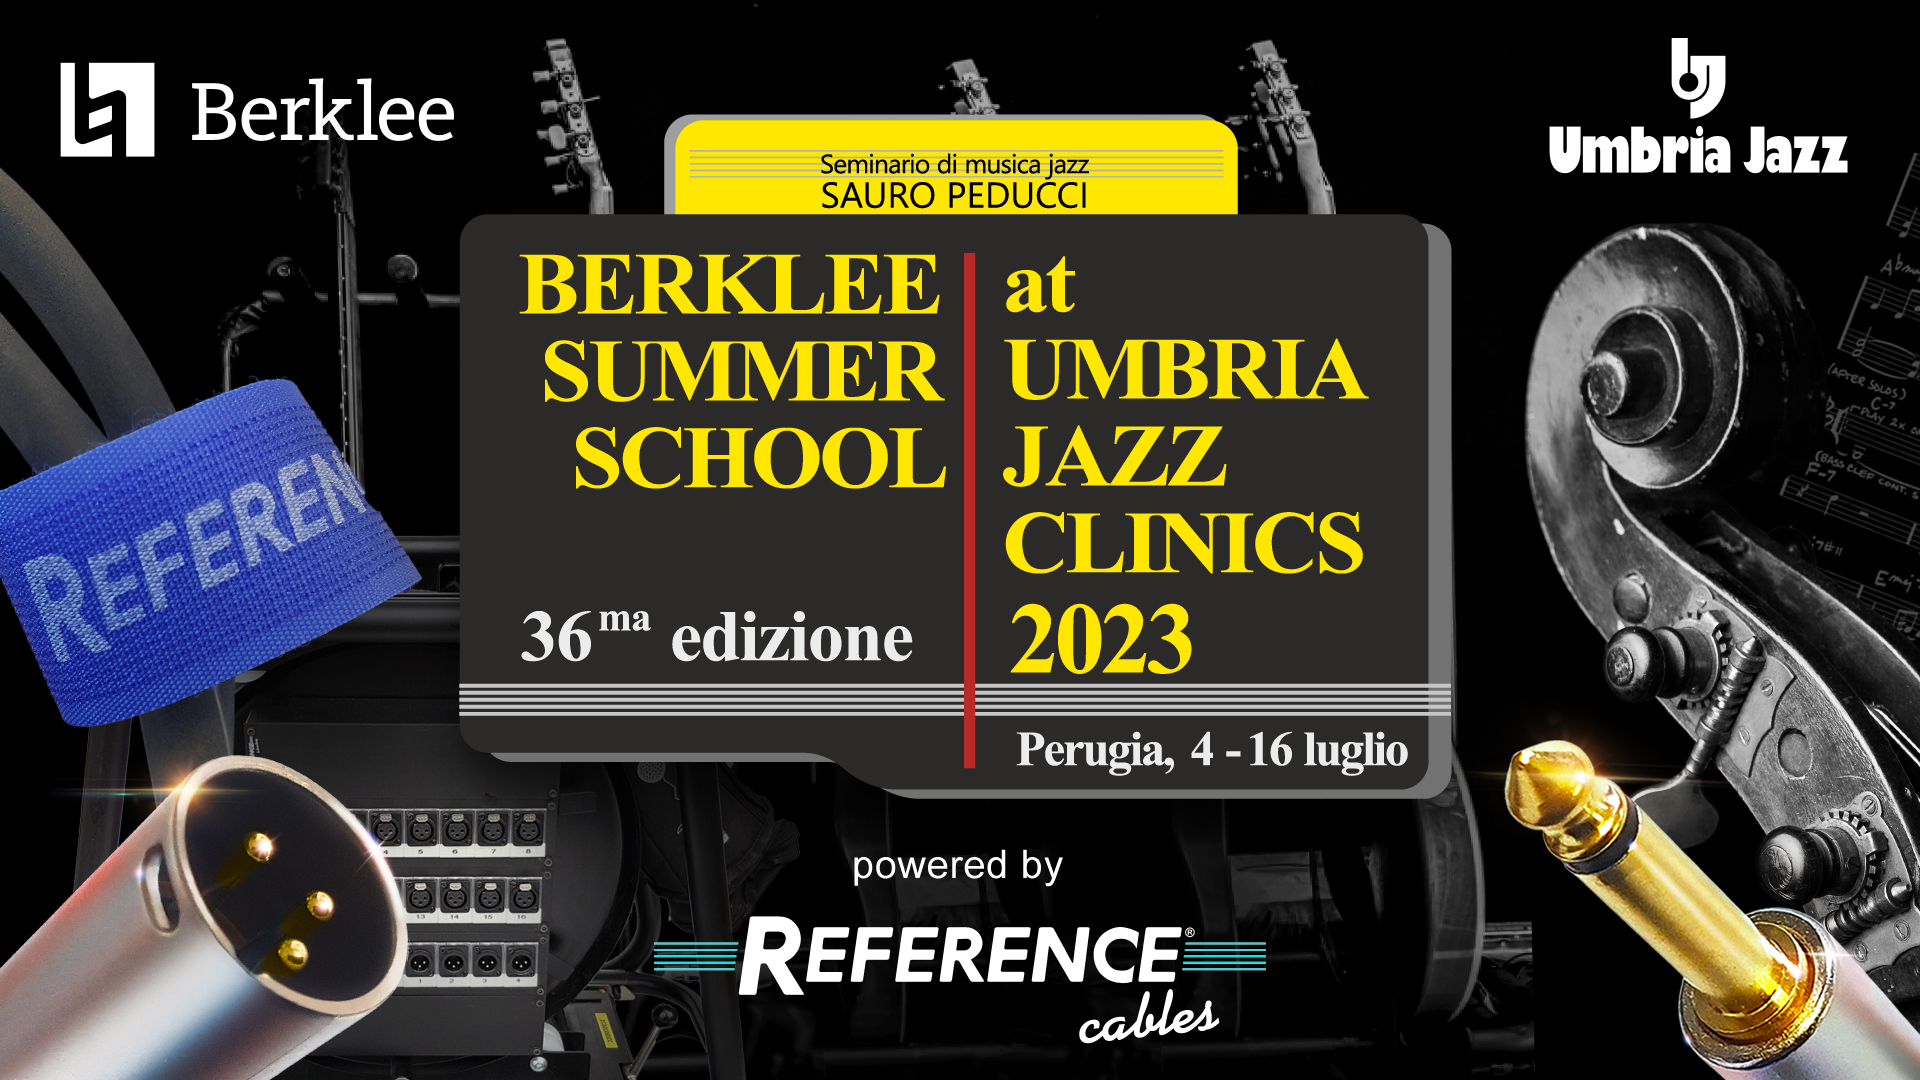 Berklee at Umbria Jazz Clinics 2023, powered by Reference®